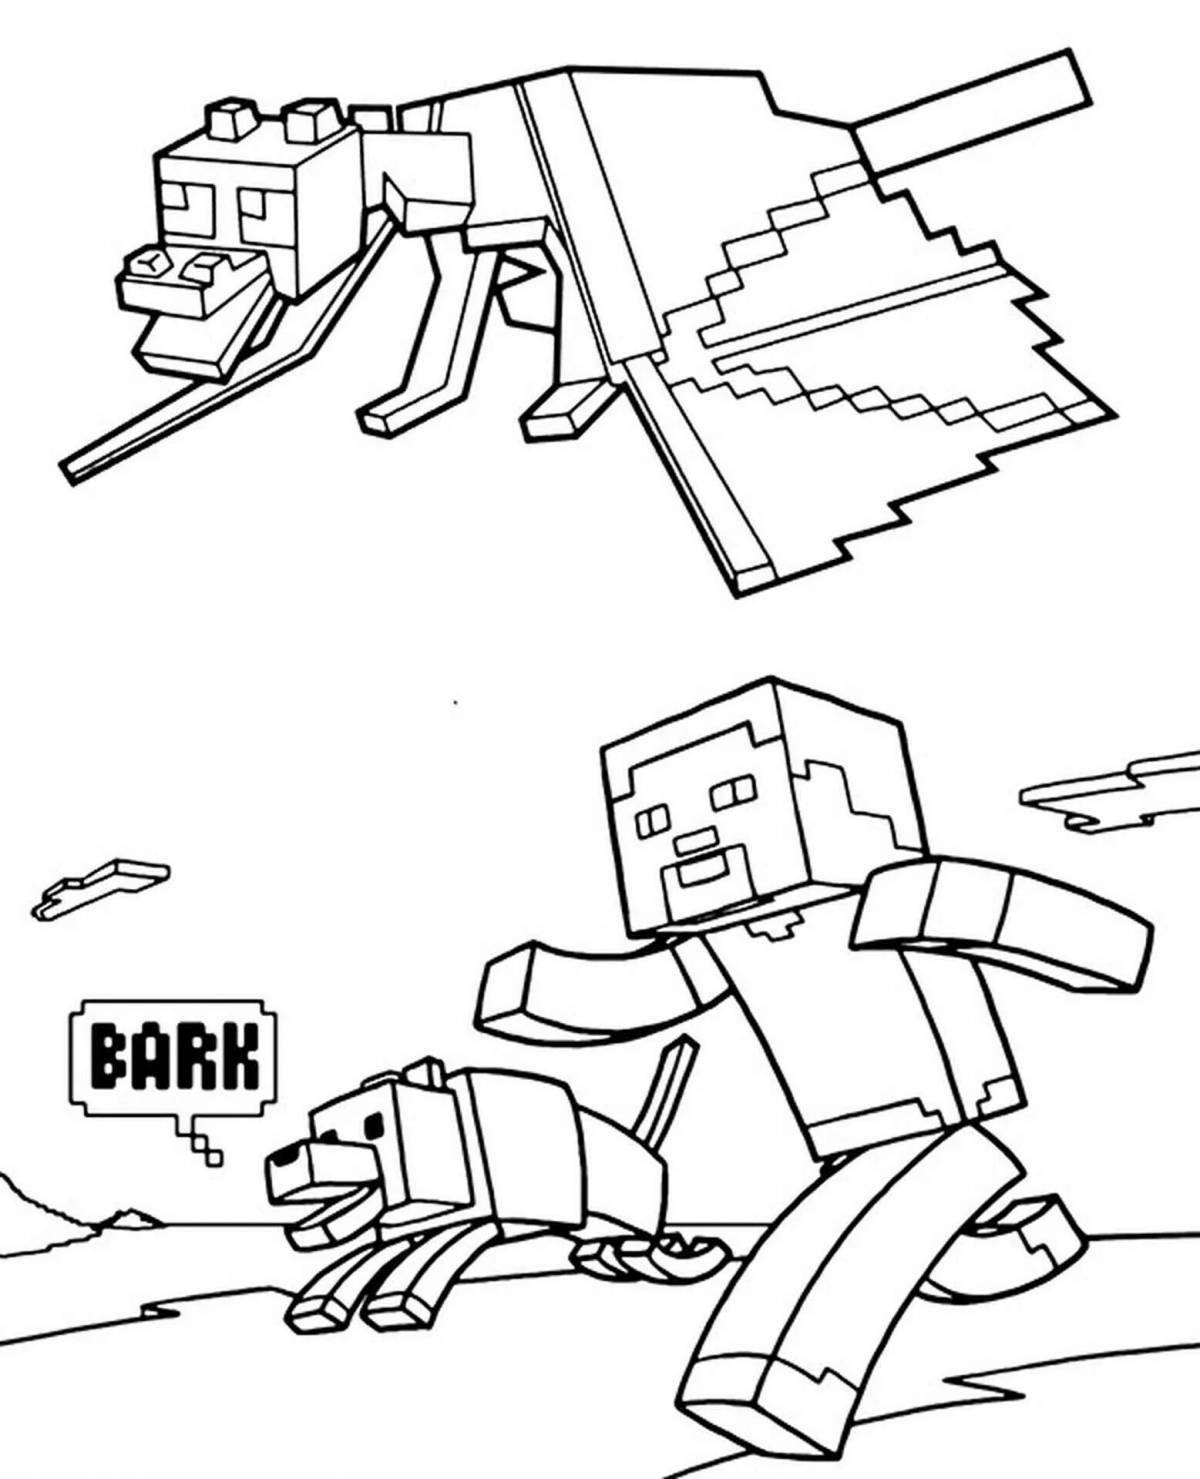 Fancy minecraft visor coloring page